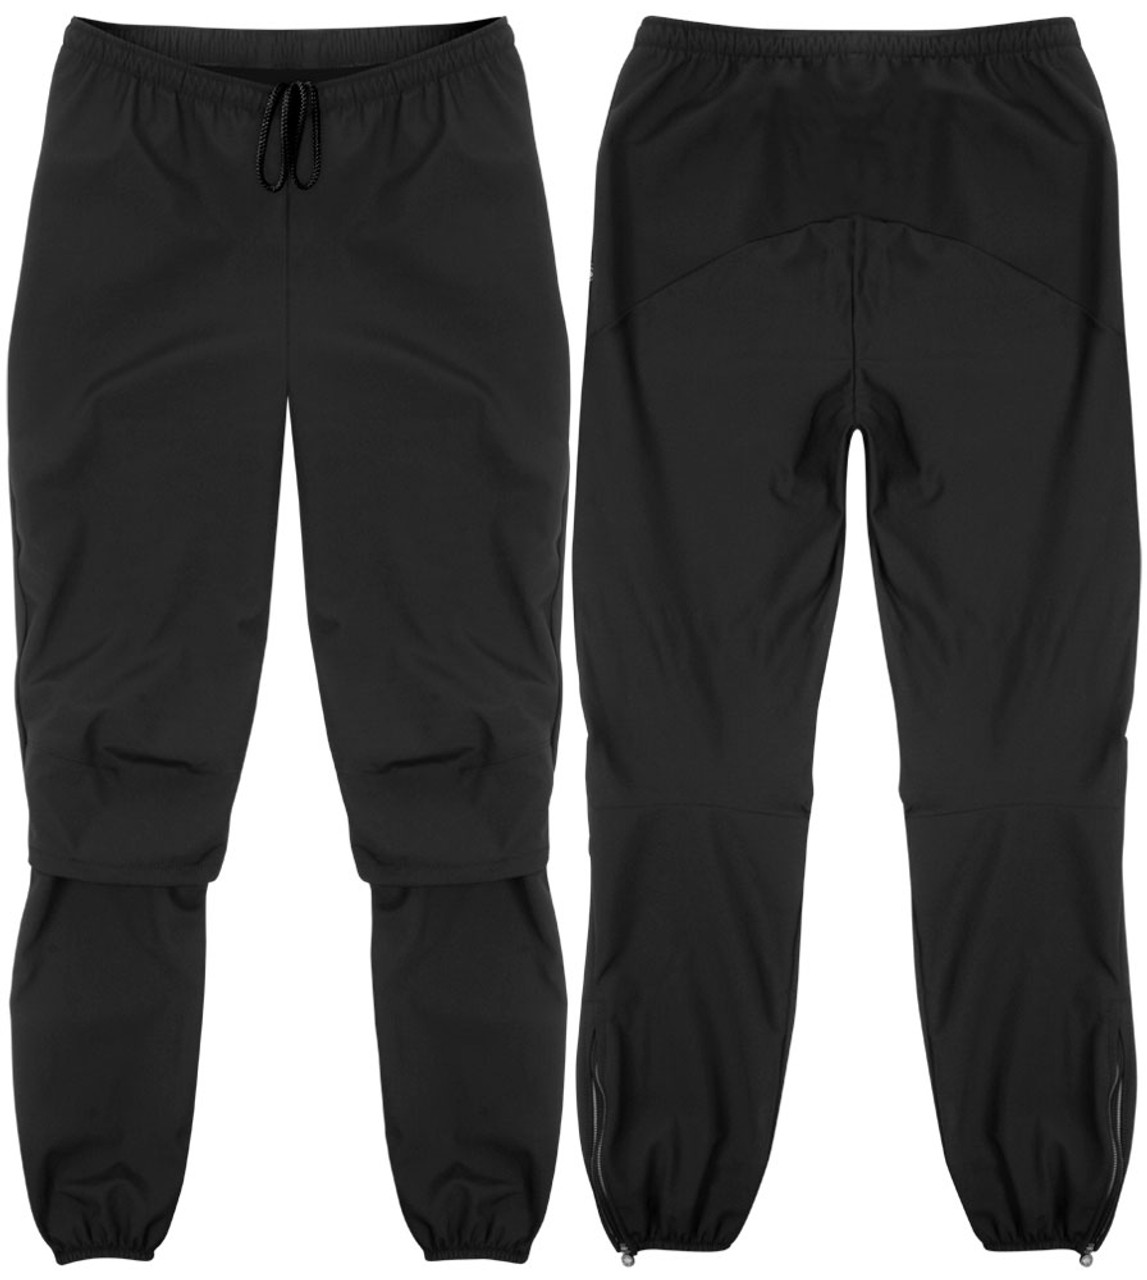 Tall Black Thermal Windproof Unpadded Athletic Pants - Made in USA